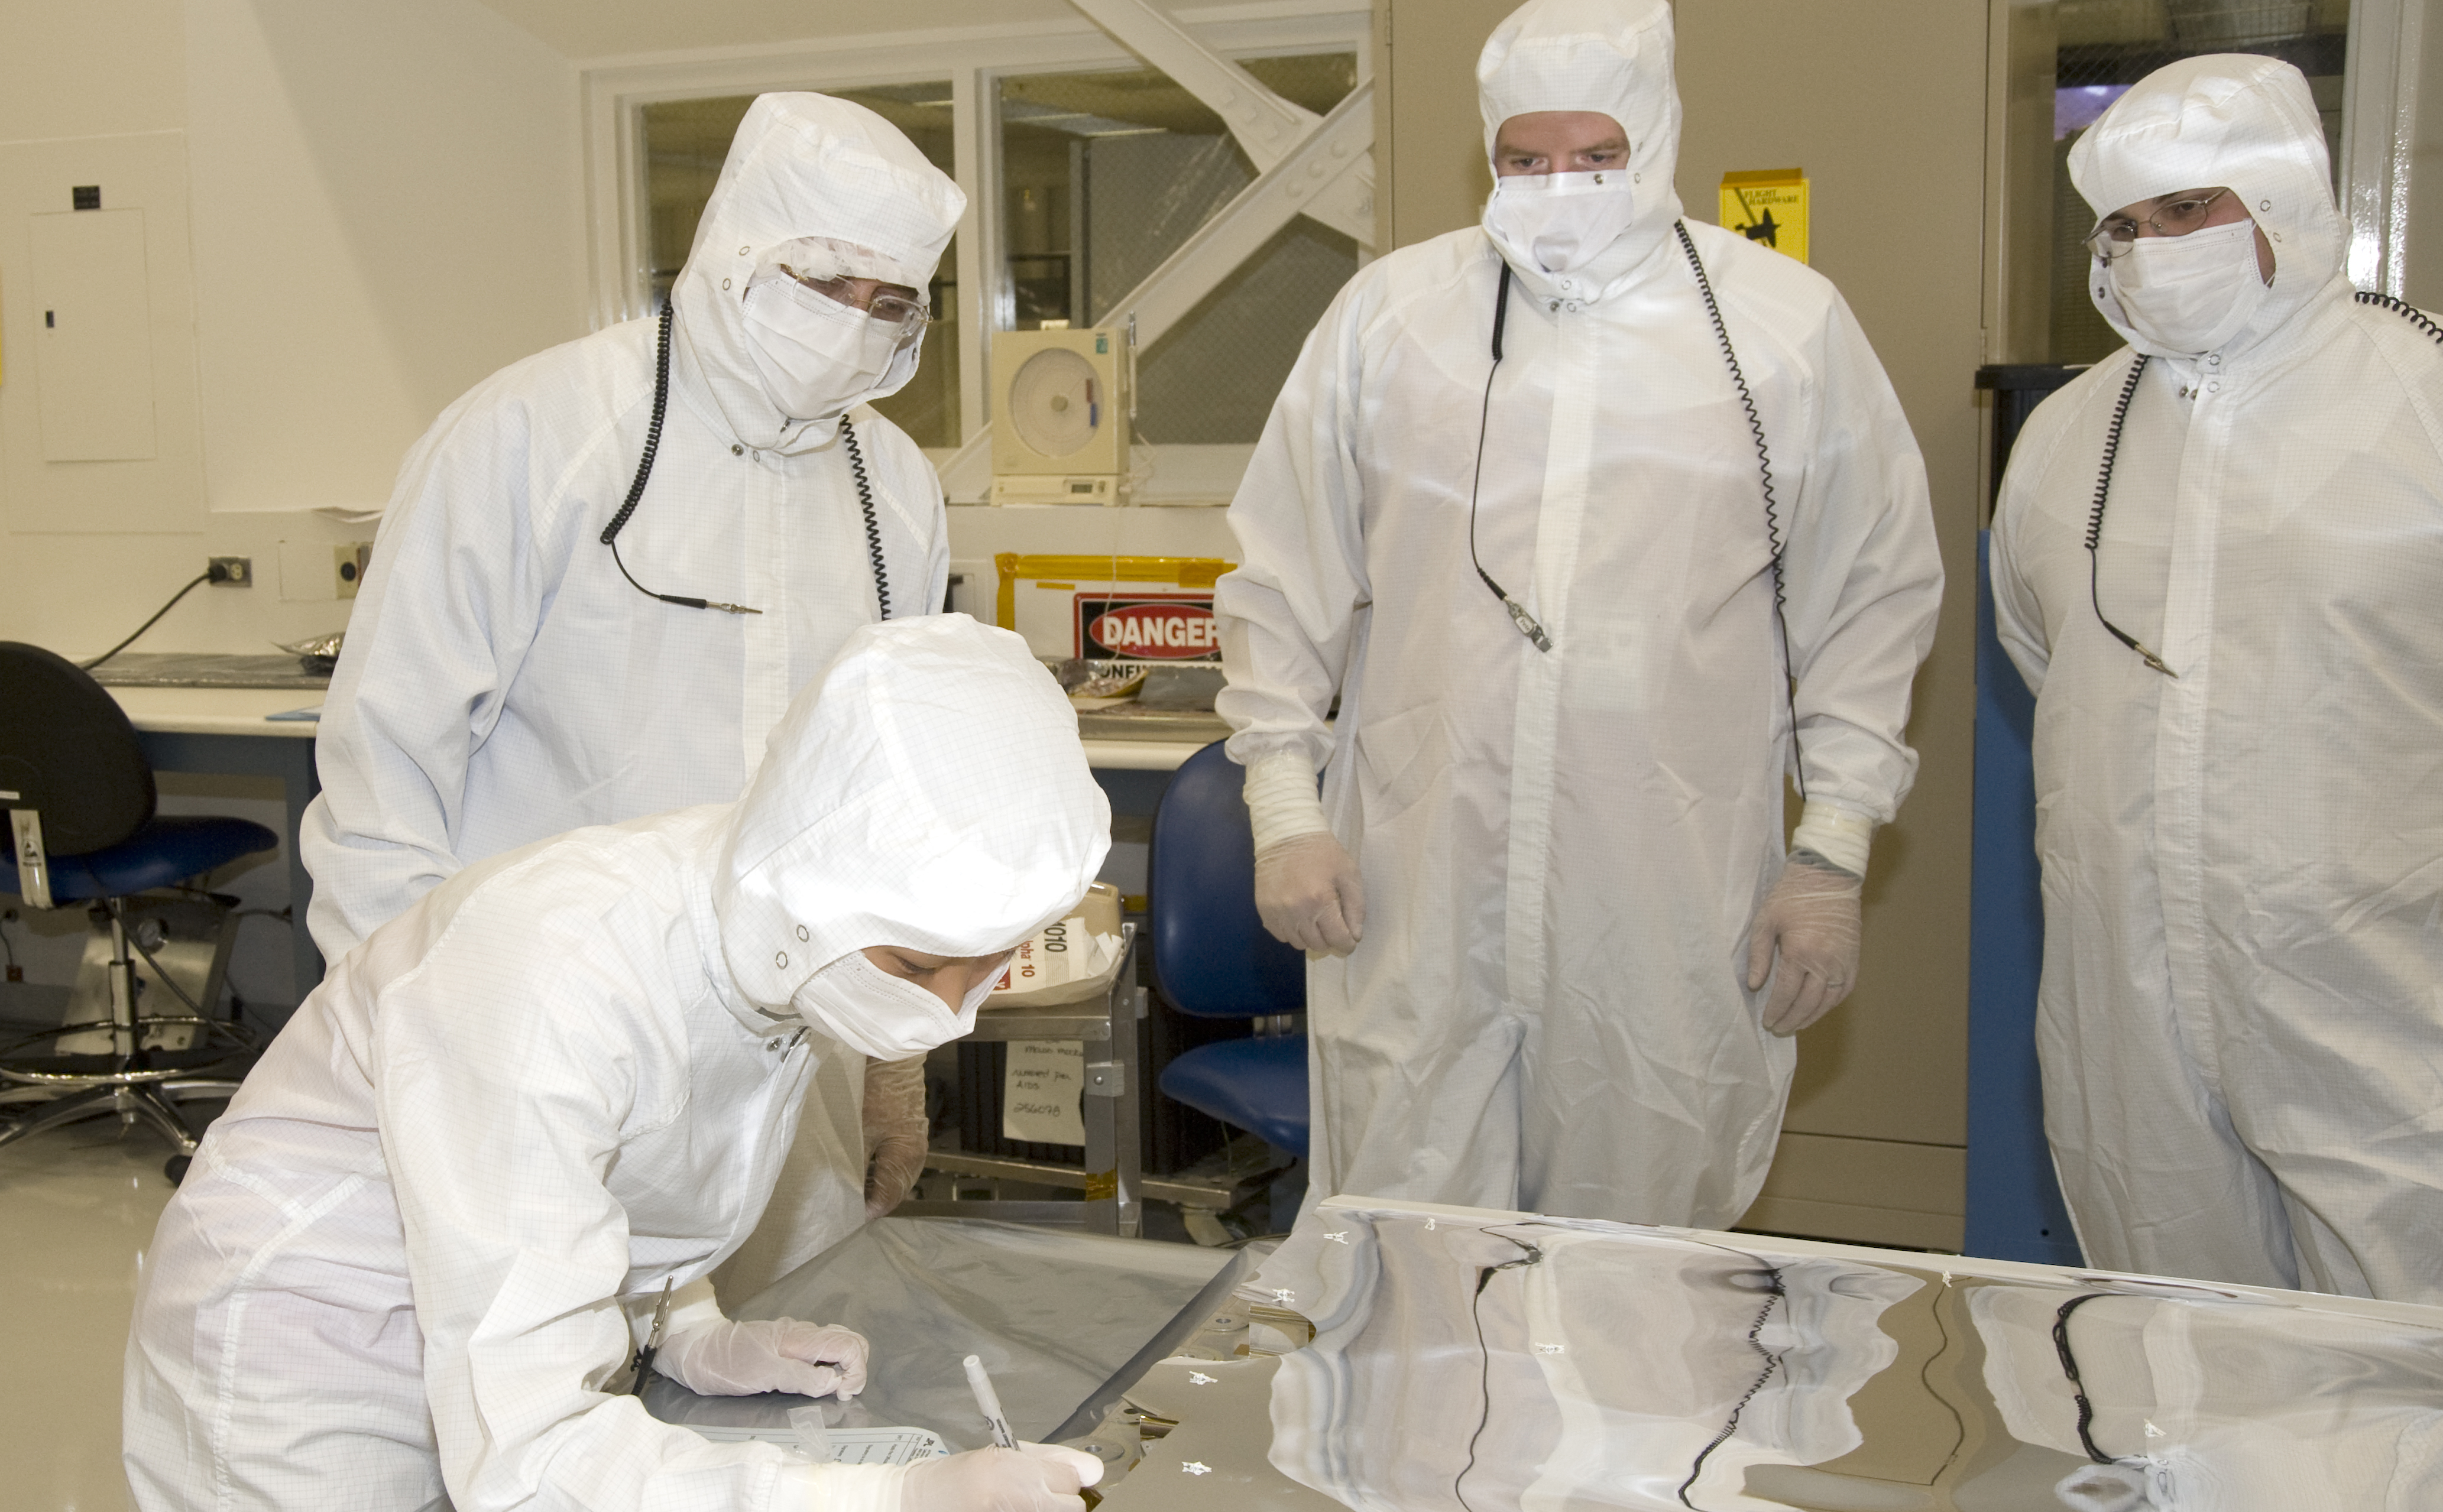 Clara Ma signed the rover on June 8, 2009, inside a cleanroom of the Spacecraft Assembly Facility